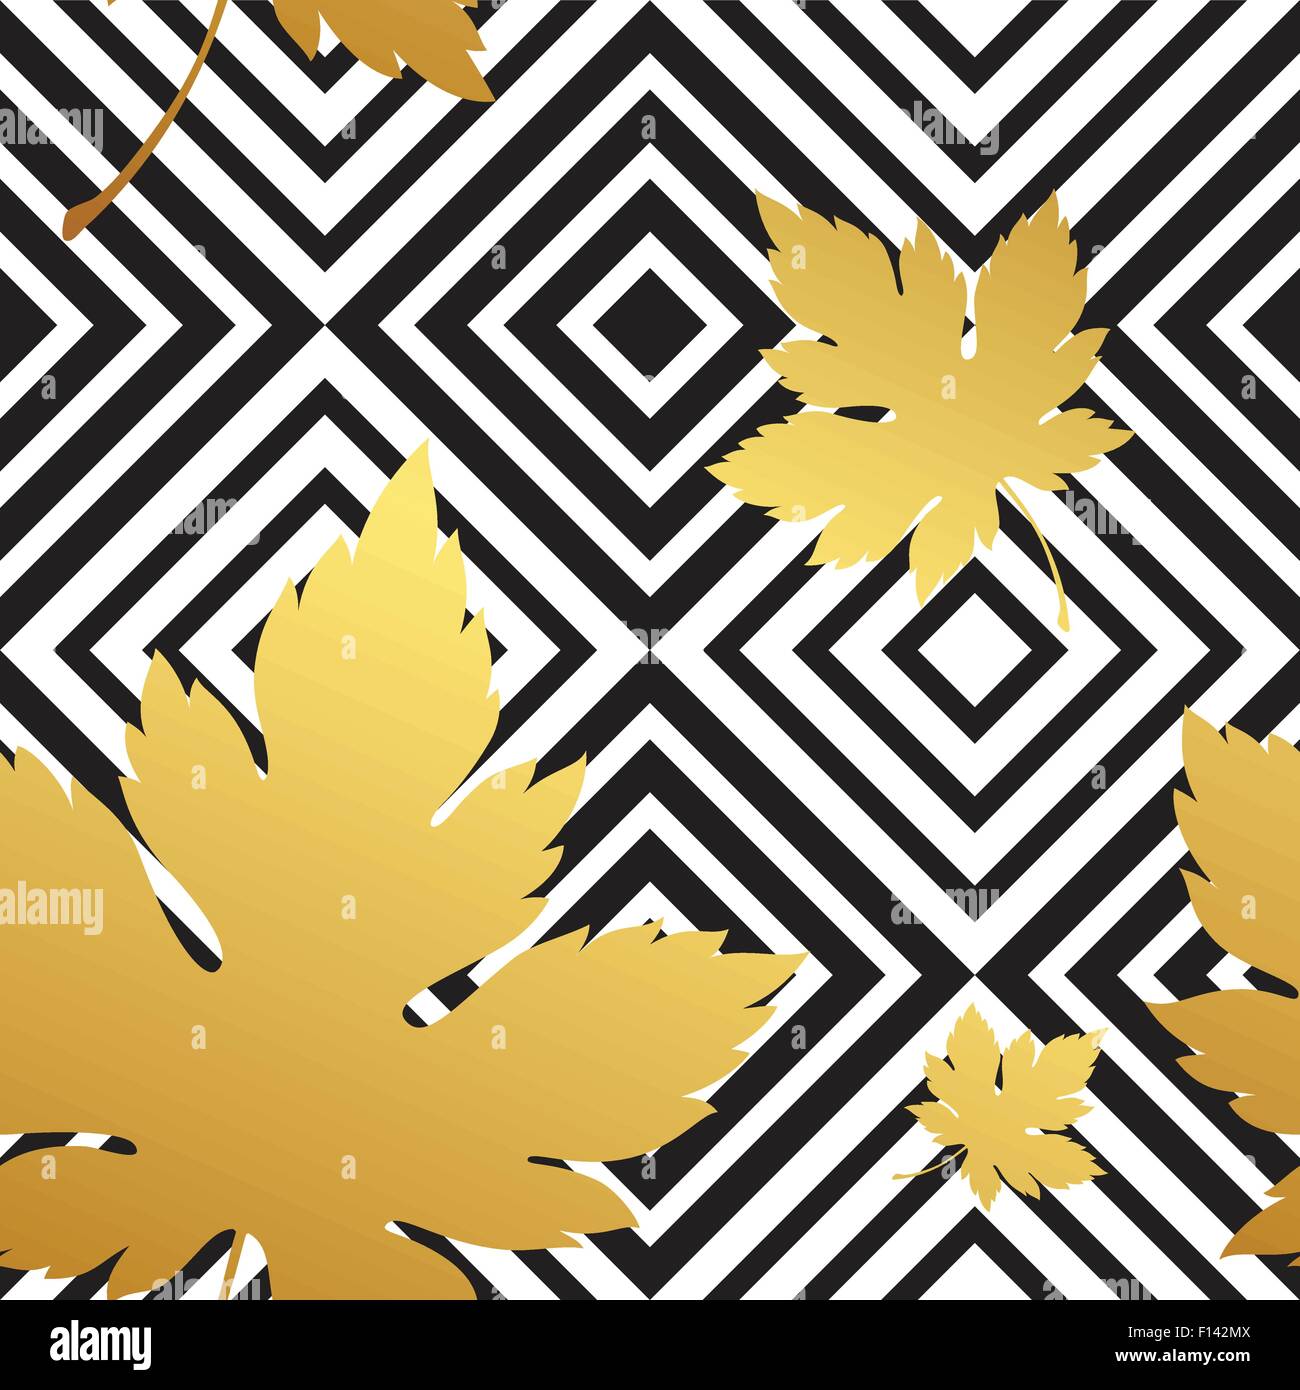 Geometric seamless leaf repeat pattern in black, white and gold. Stock Vector